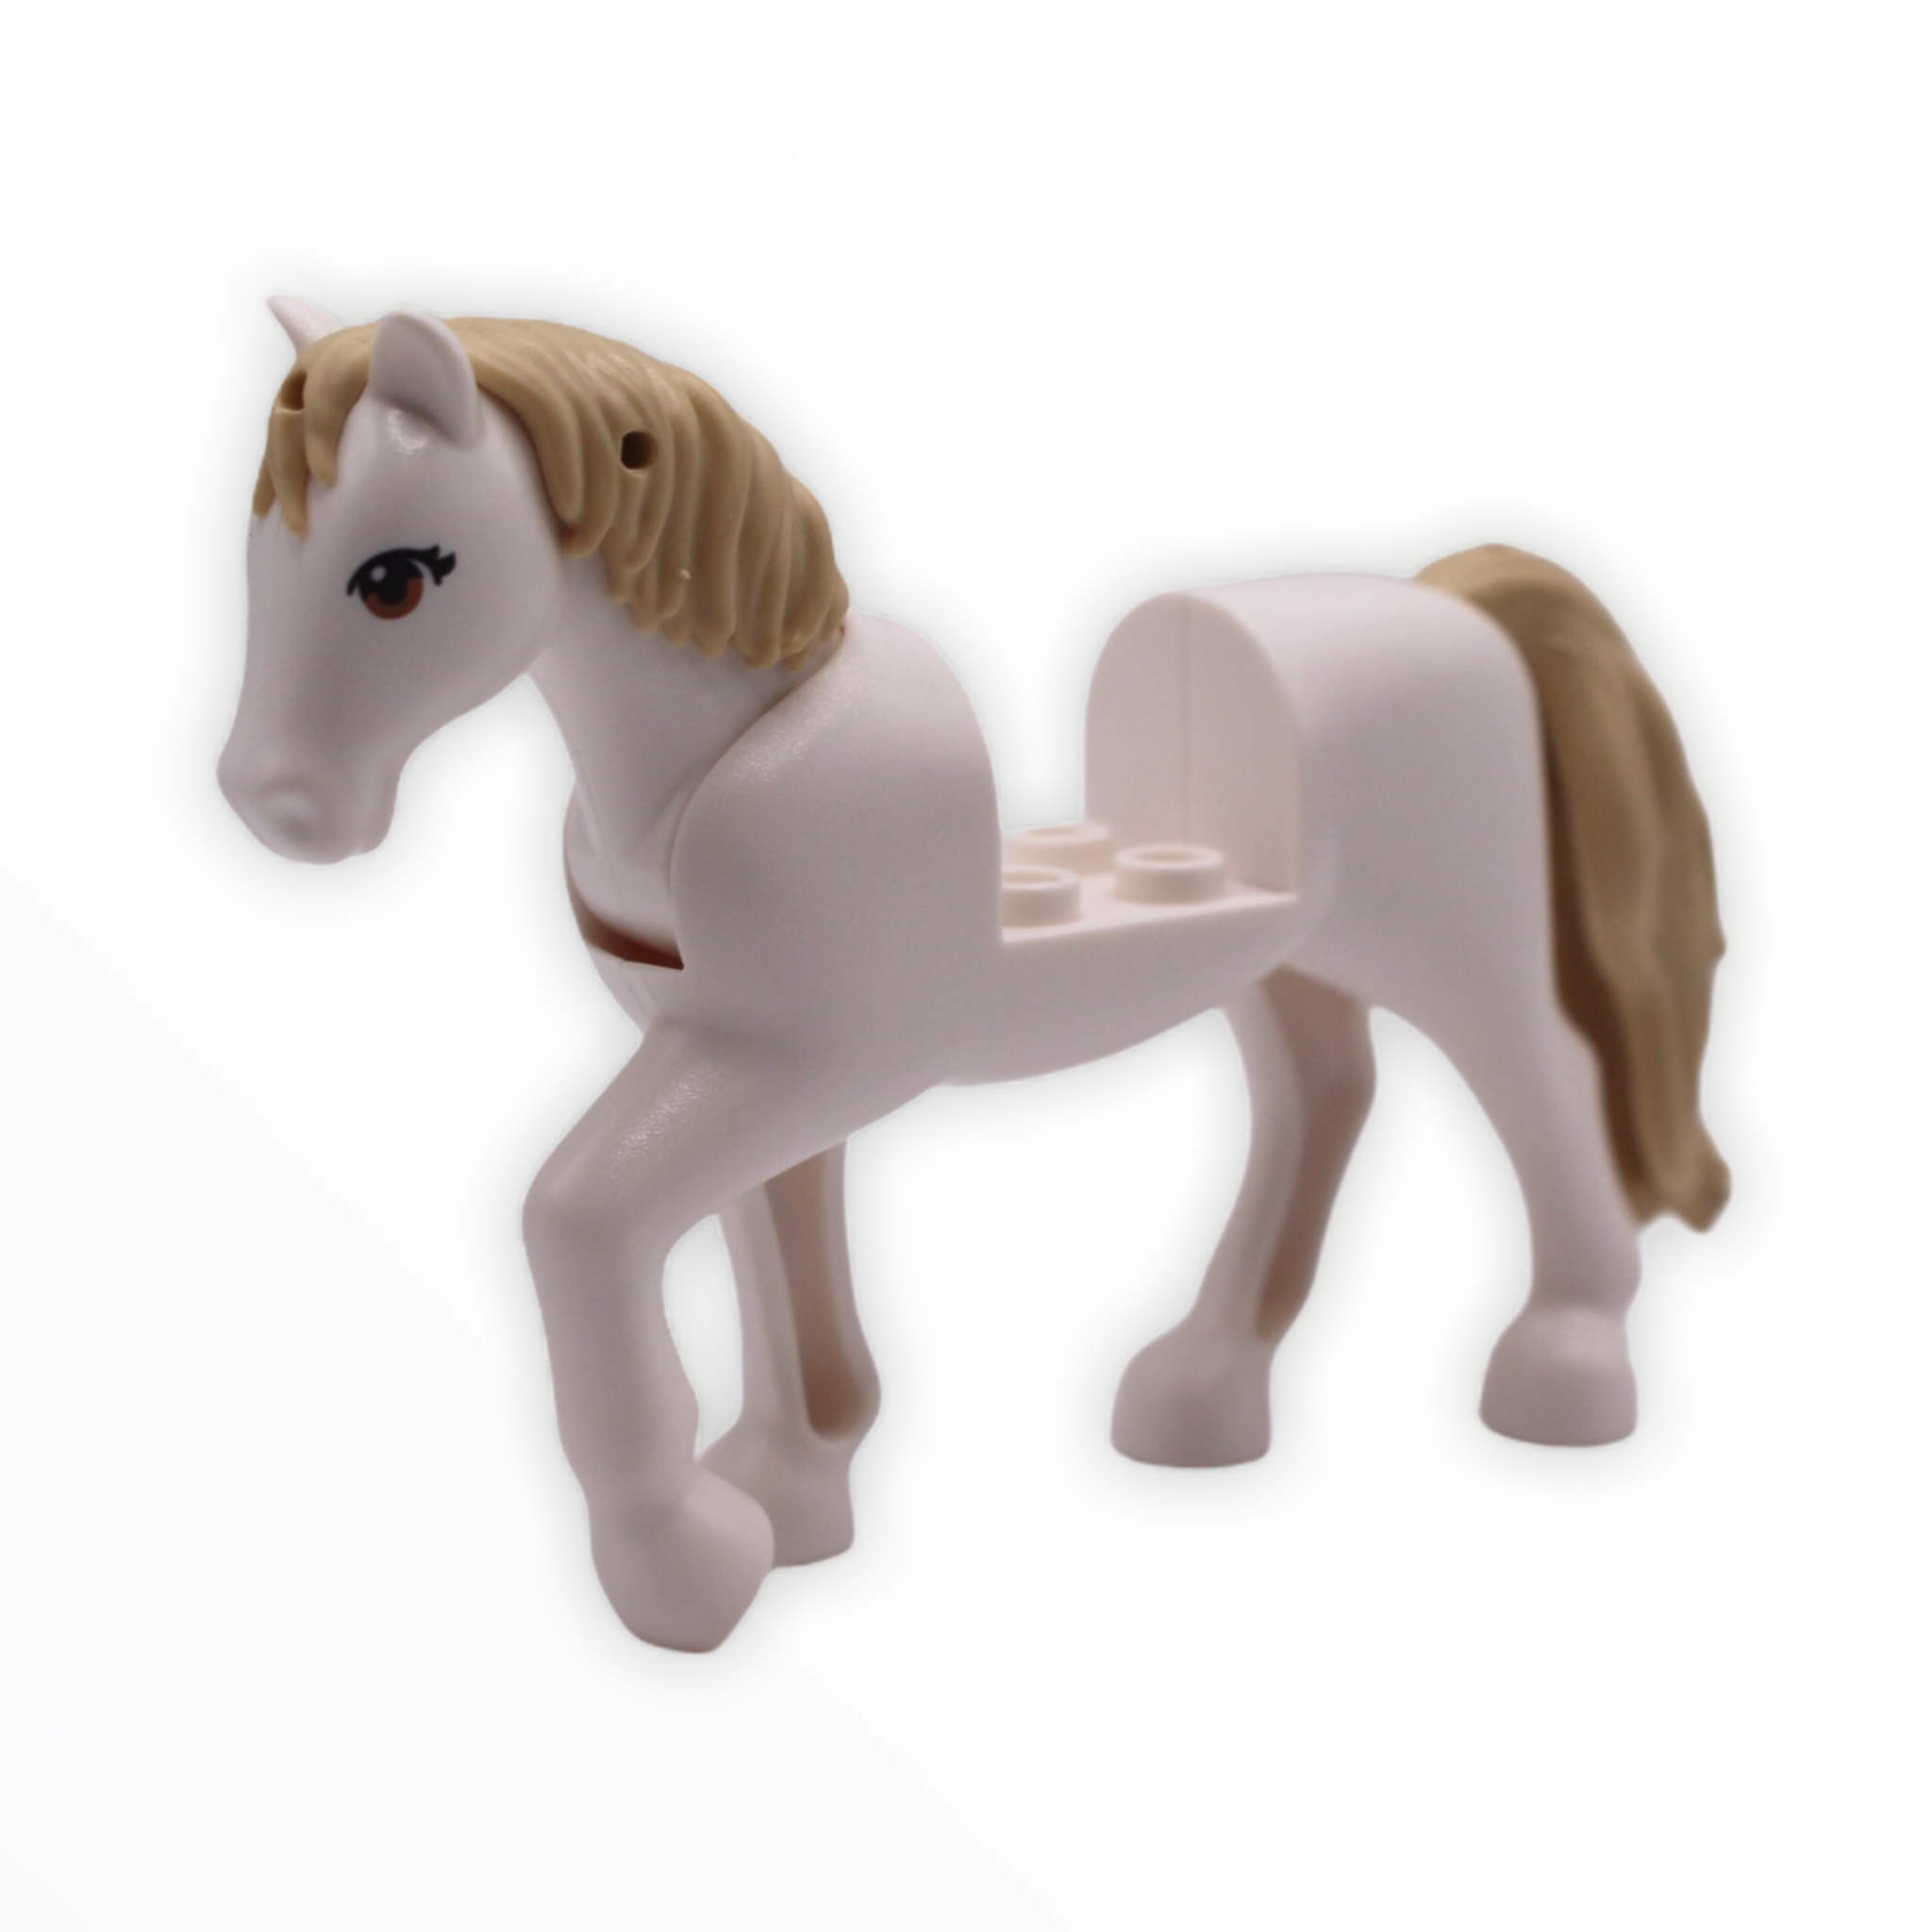 White Horse with tan mane (Friends, 2021)